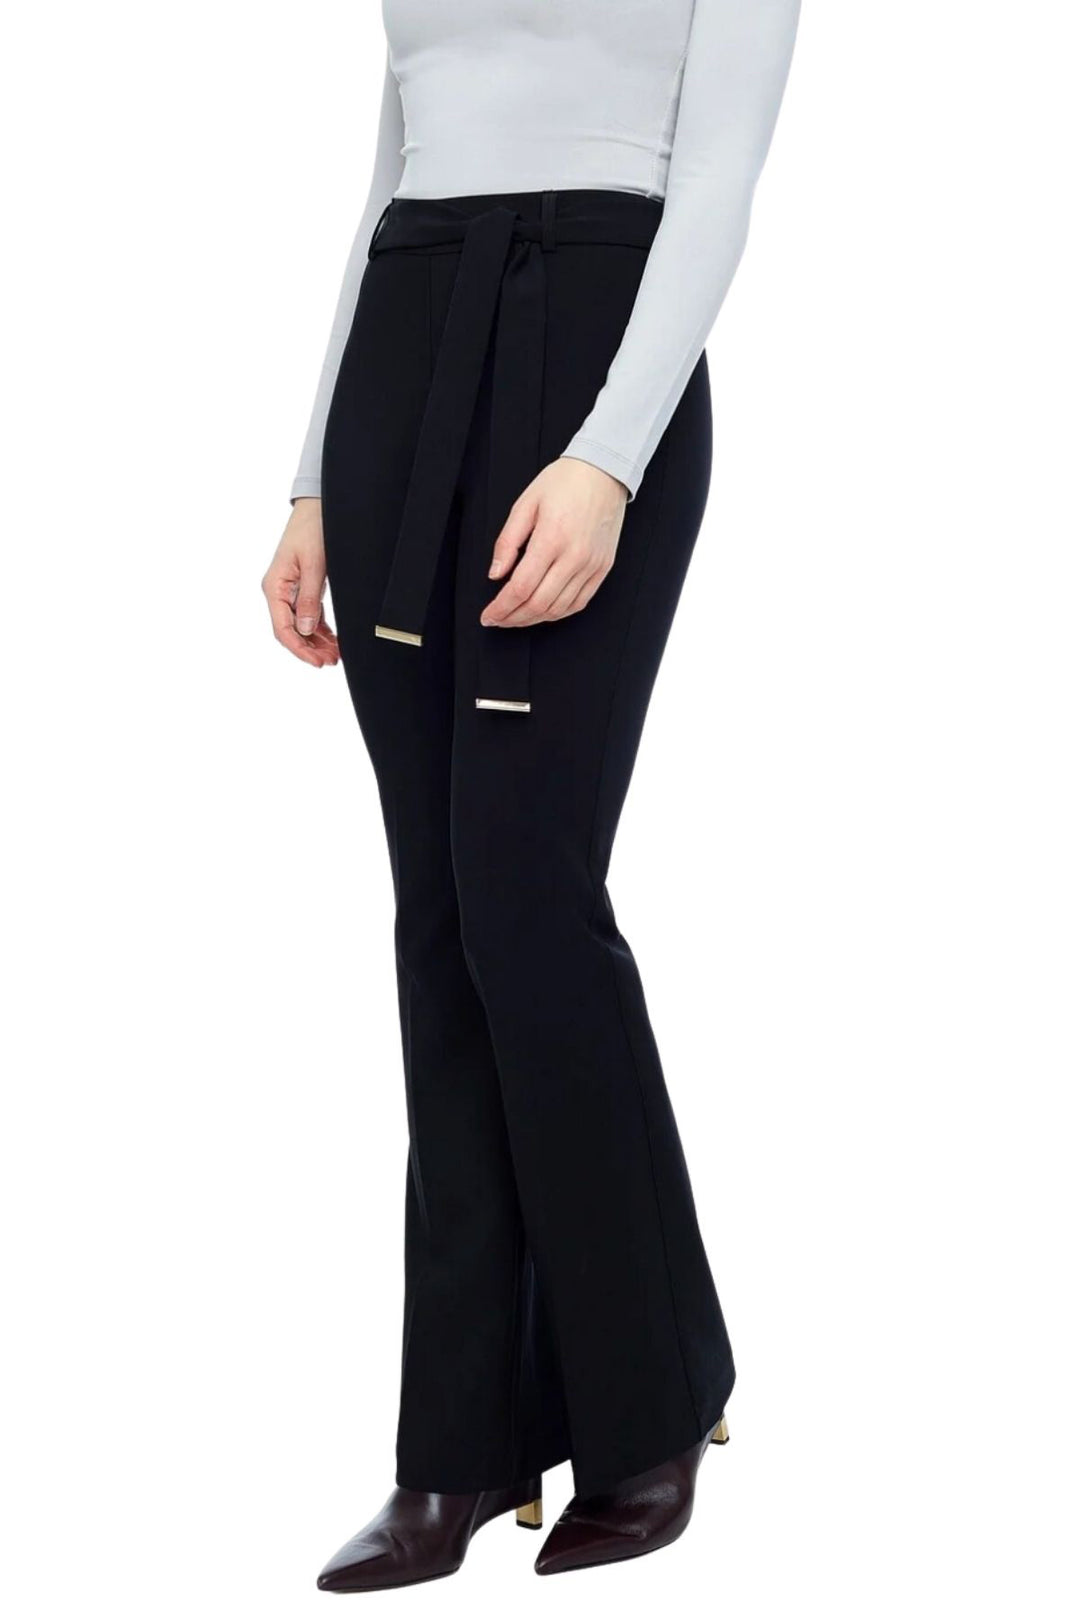 The High Waist Belted Boot Cut Pant